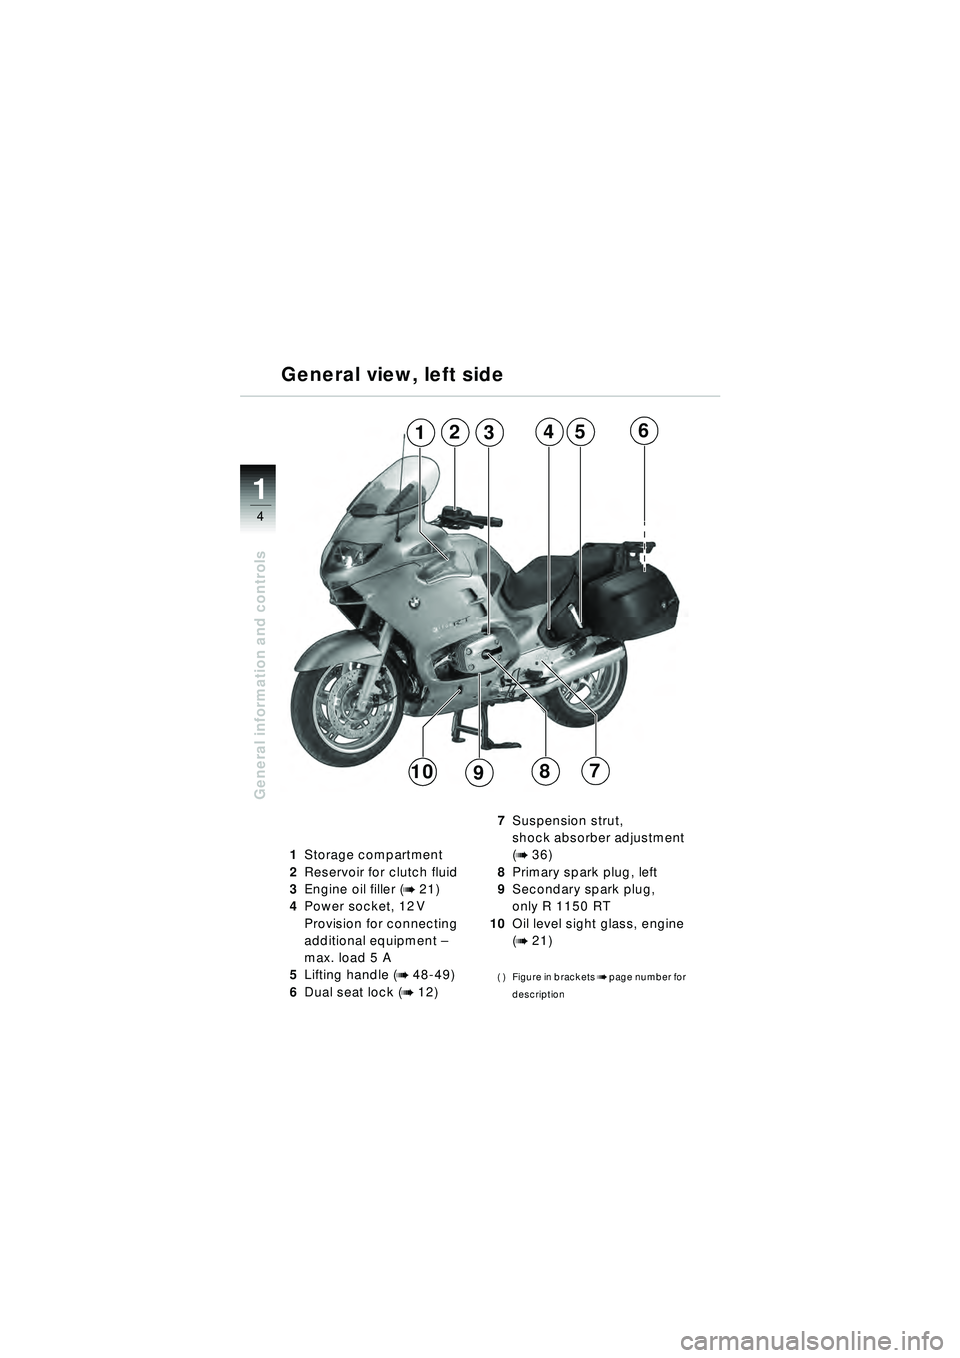 BMW MOTORRAD R 1150 RT 2002  Riders Manual (in English) 4
General information and controls
1
General view, left side
1Storage compartment
2 Reservoir for clutch fluid
3 Engine oil filler (
b 21)
4 Power socket, 12 V
Provision for connecting 
additional equ